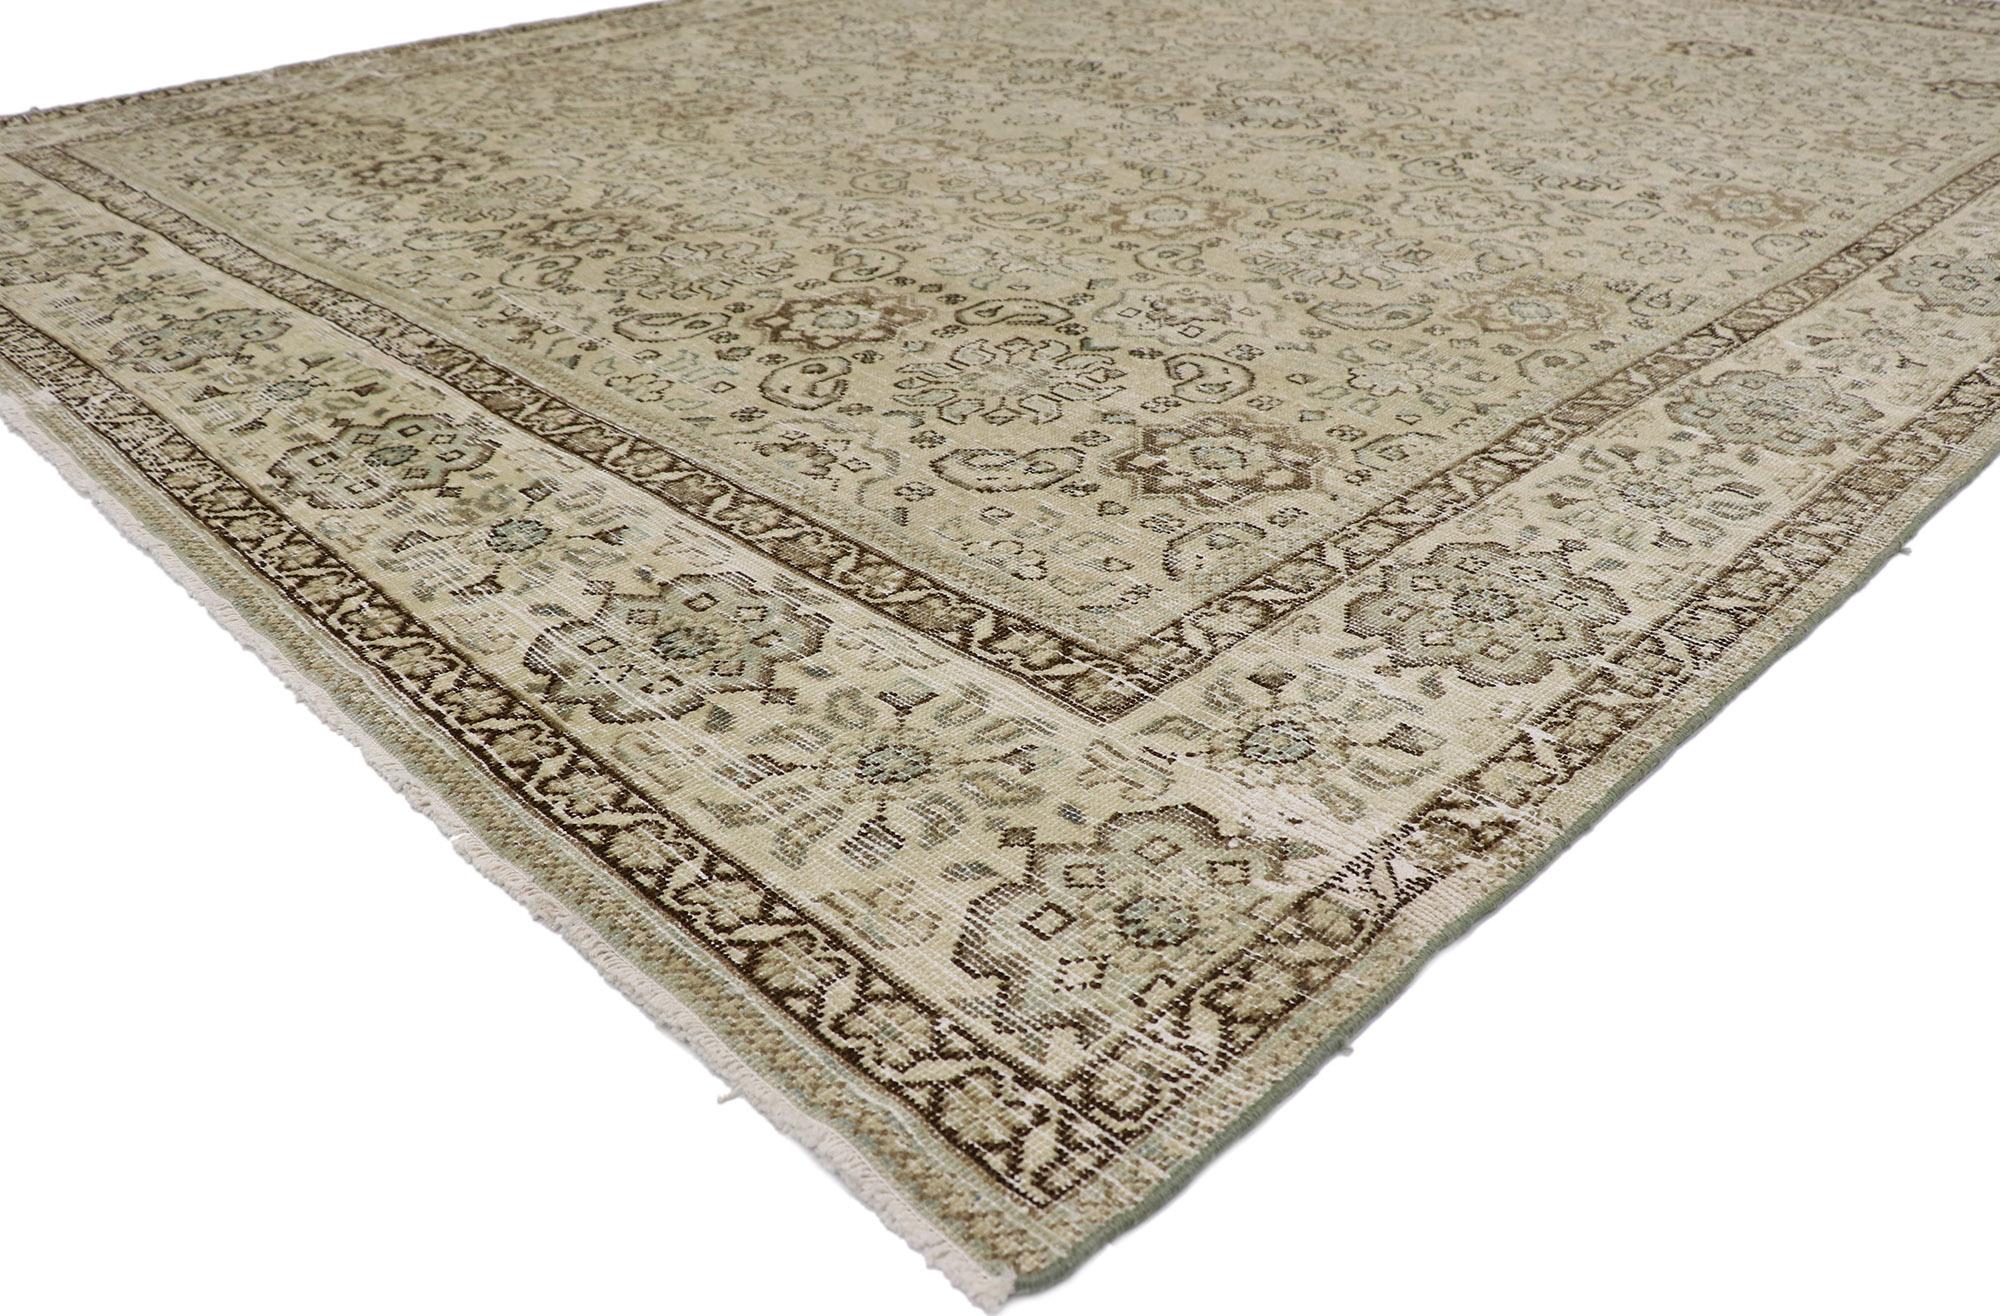 60930 distressed antique Persian Mahal rug 09'03 x 12'00. Cleverly composed and poised to impress with its rustic sensibility, this hand knotted wool distressed antique Persian Mahal rug will take on a curated lived-in look that feels timeless while